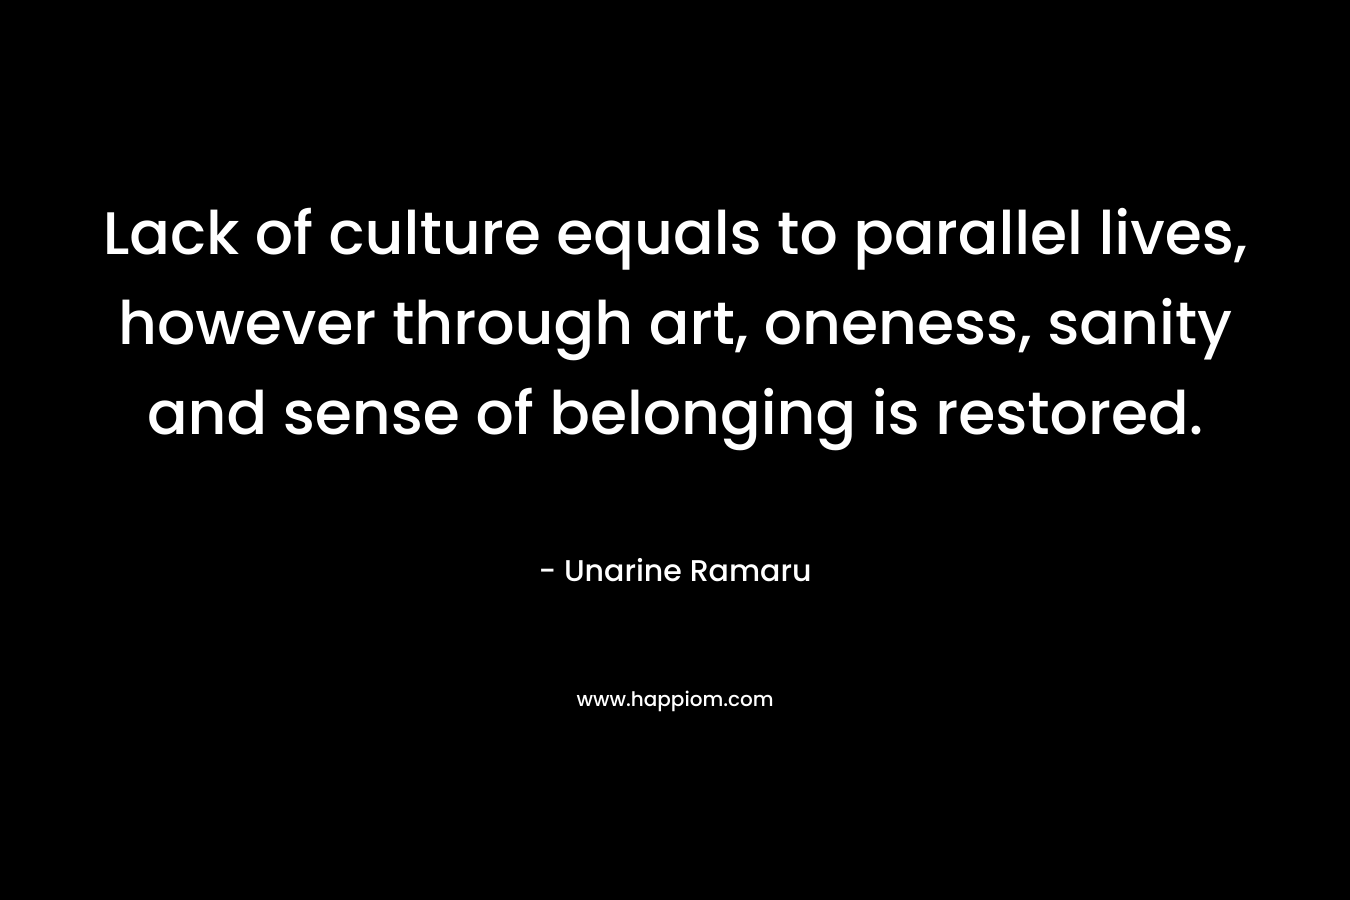 Lack of culture equals to parallel lives, however through art, oneness, sanity and sense of belonging is restored. – Unarine Ramaru